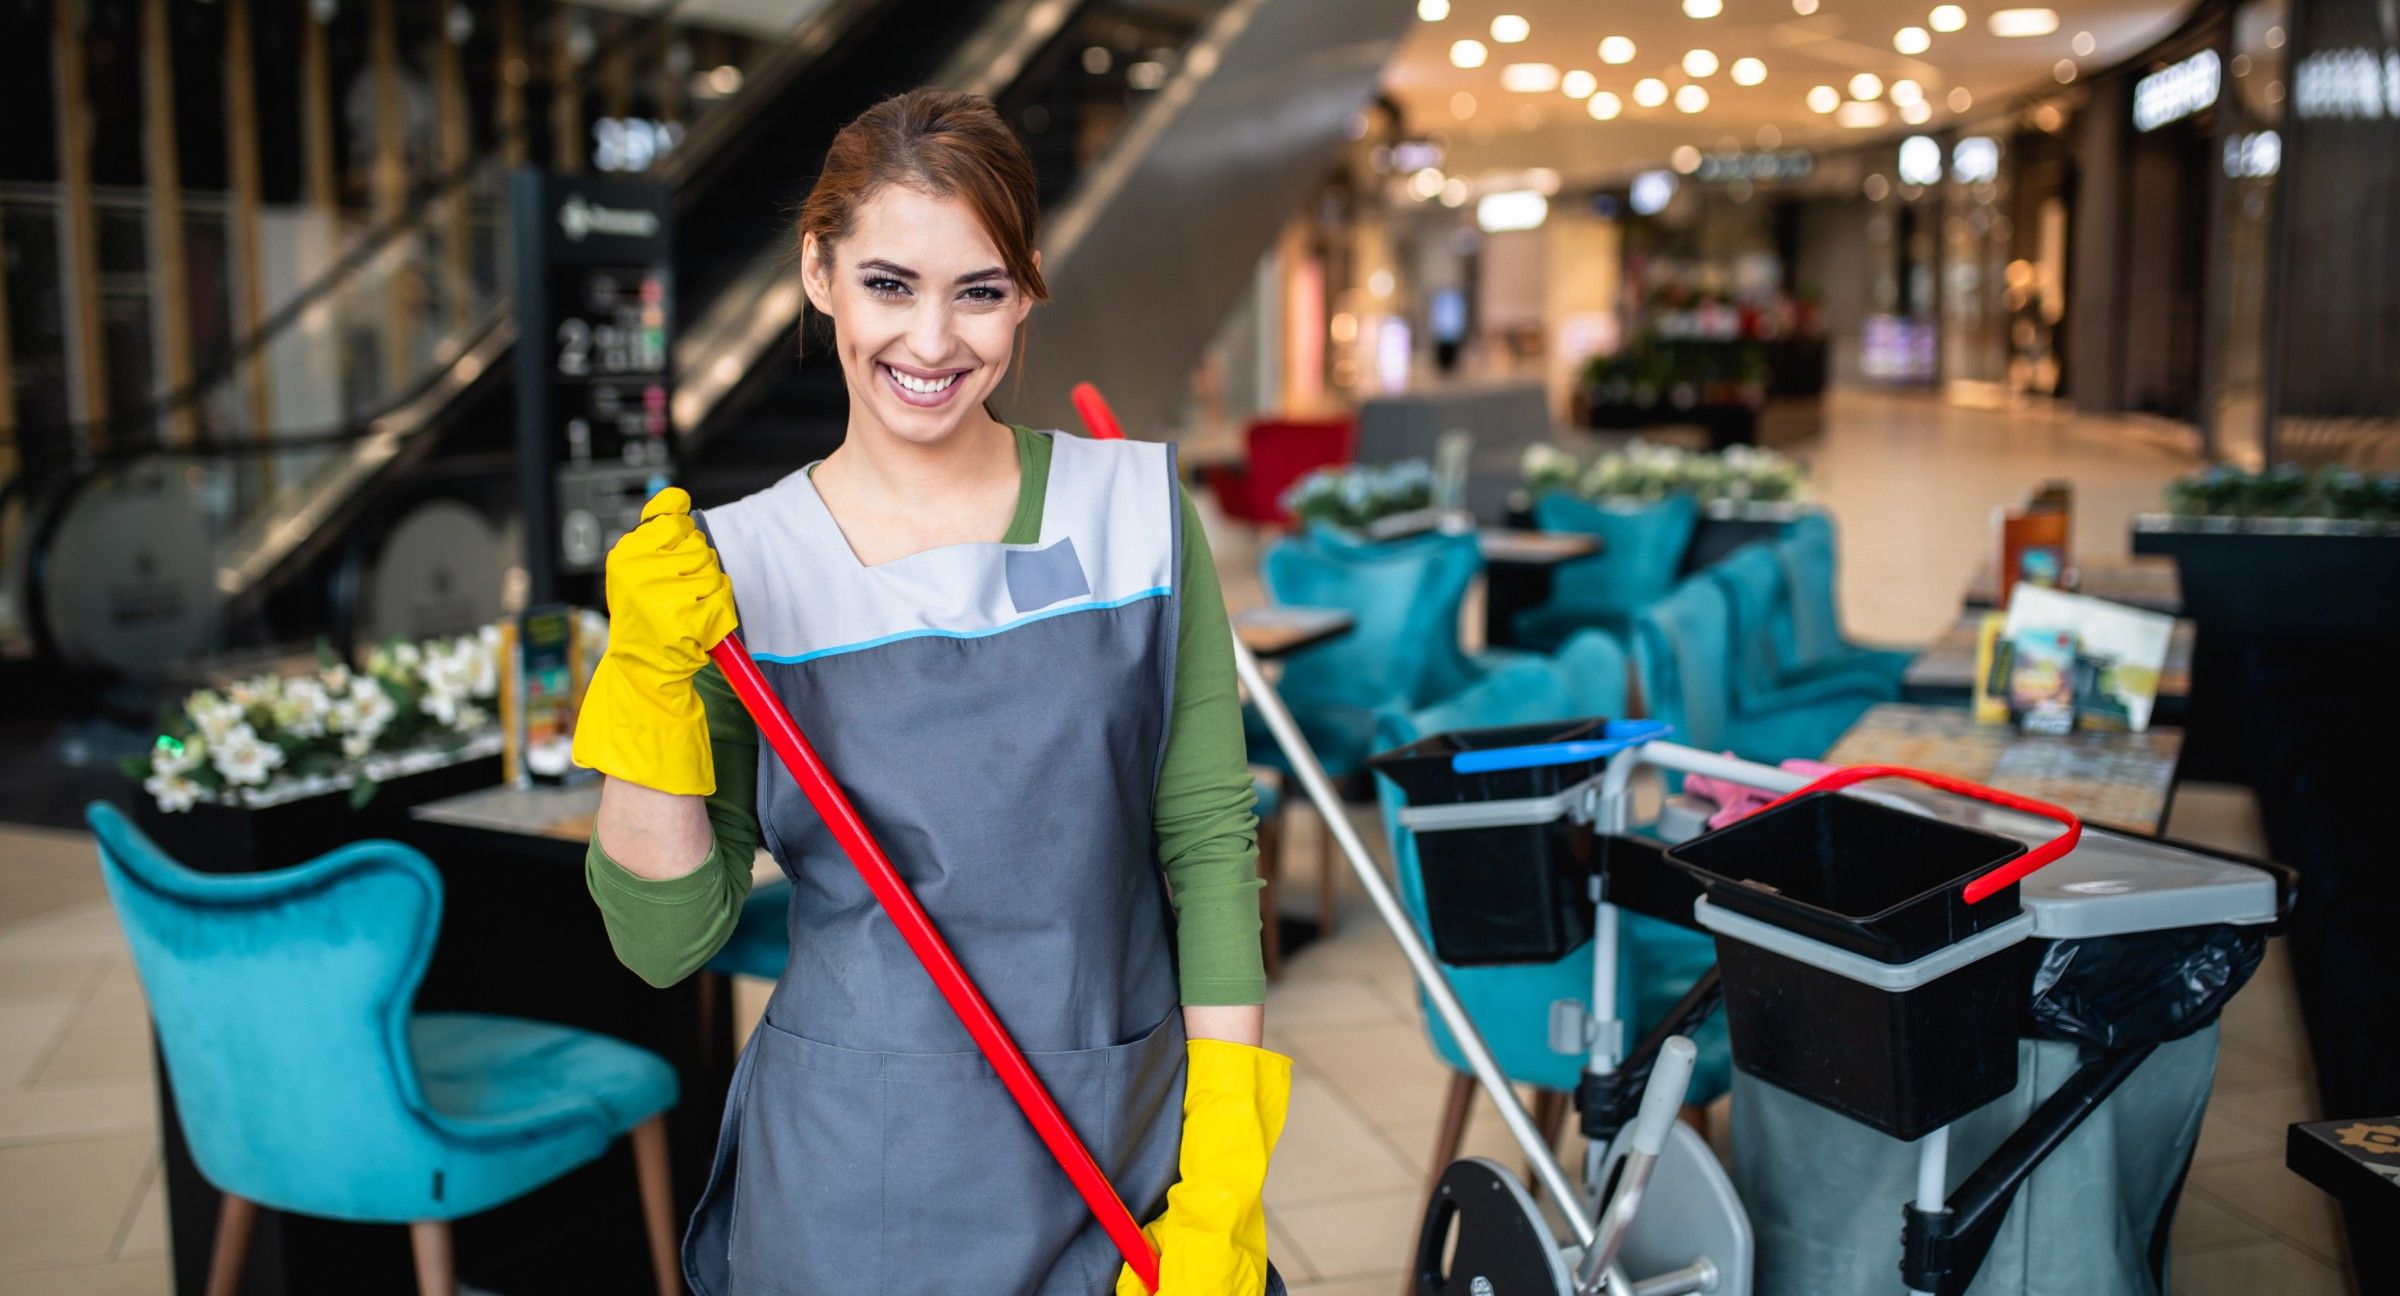 Running a restaurant is time consuming, even before including time spent cleaning. Read on to learn why you should hire a cleaning company for your restaurant!